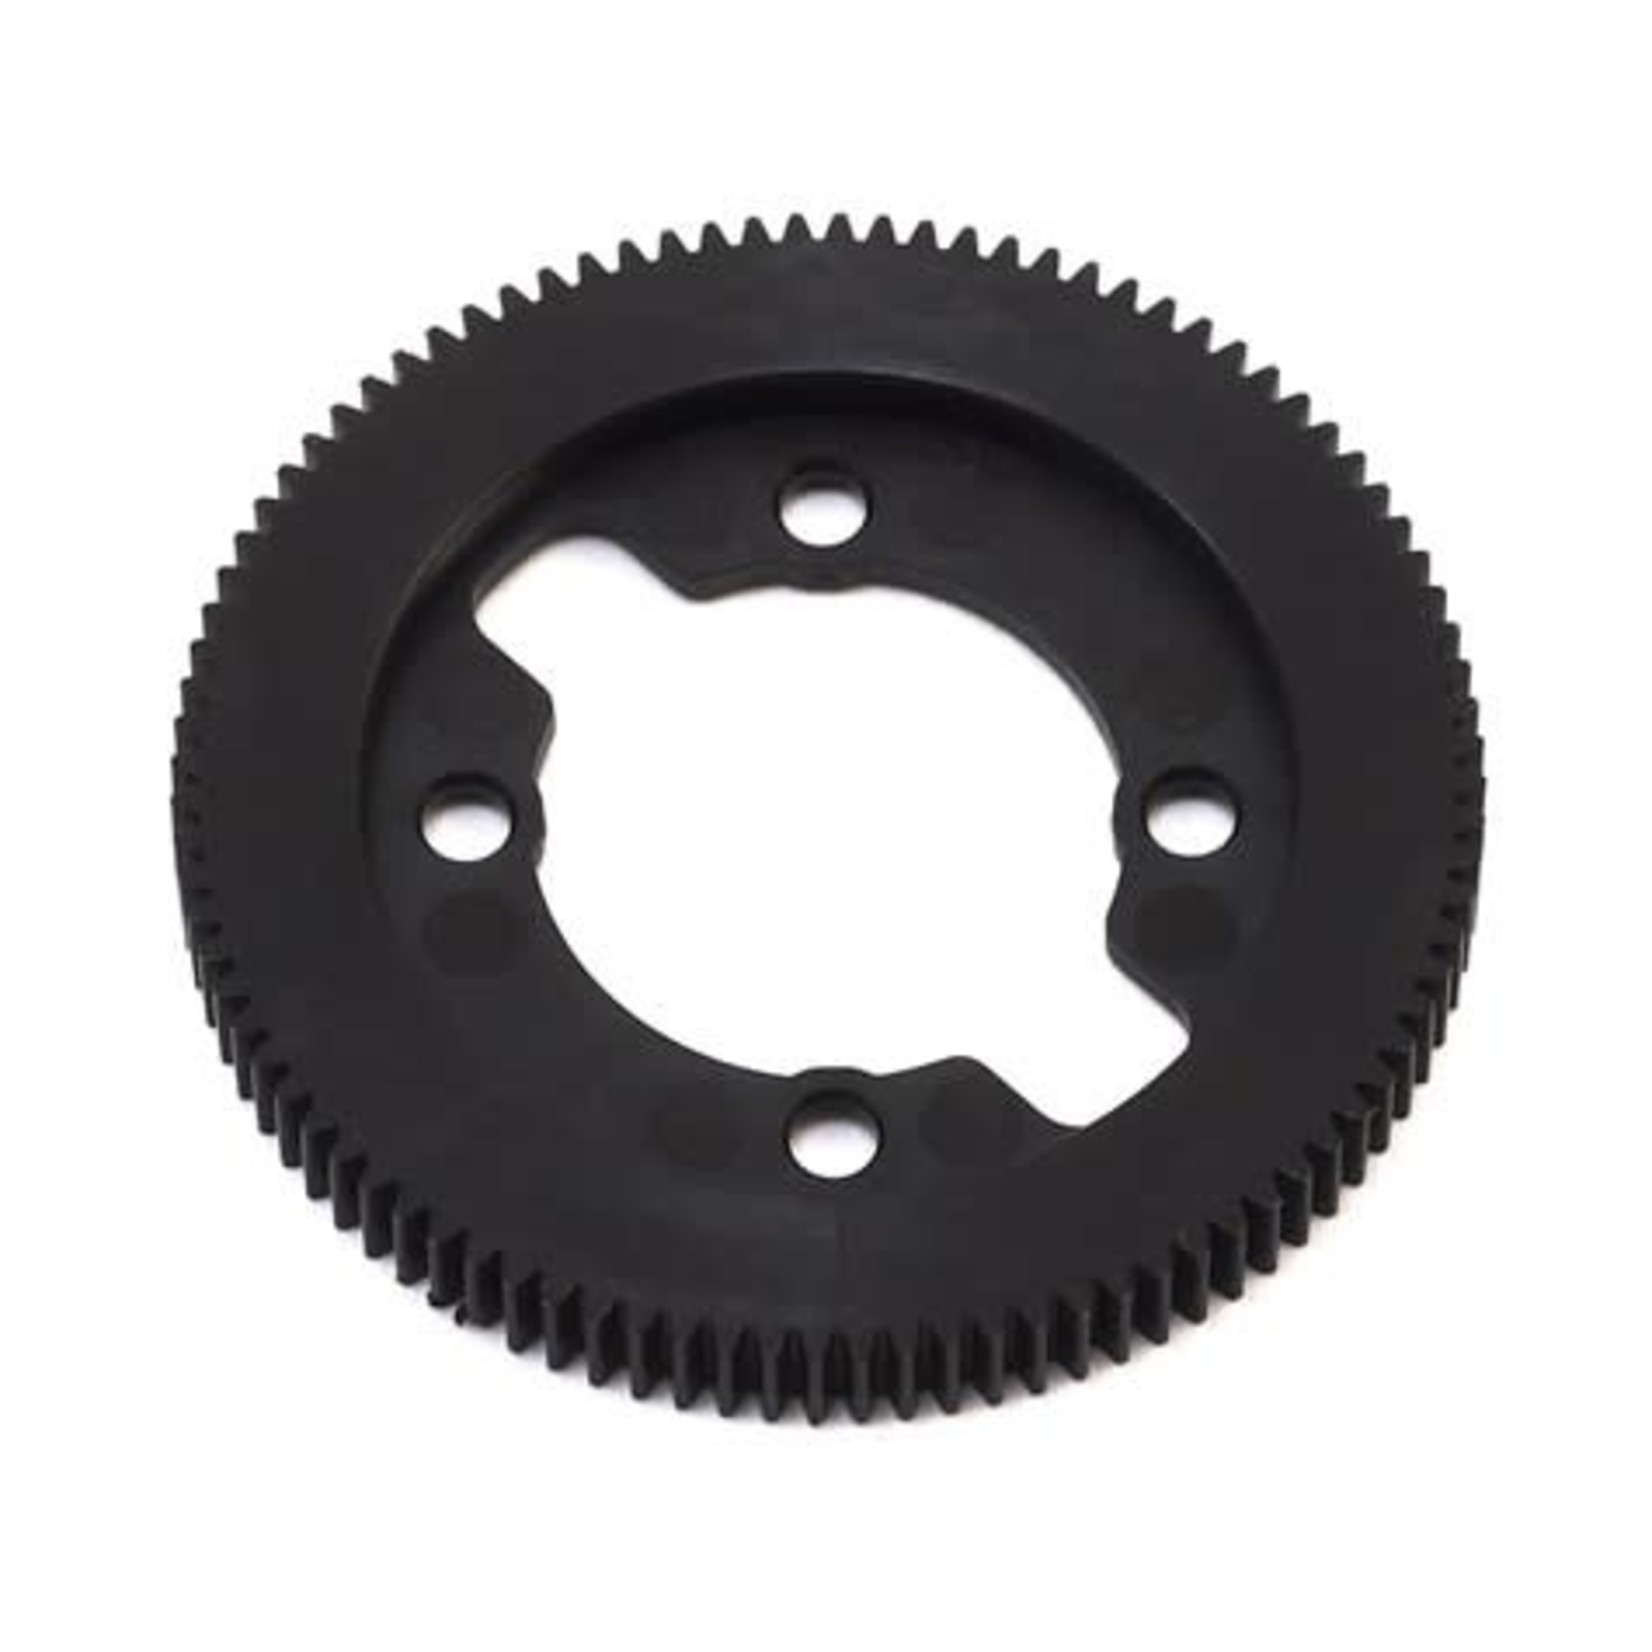 XRAY XRAY 64P Composite Gear Diff Spur Gear (92T) #375792